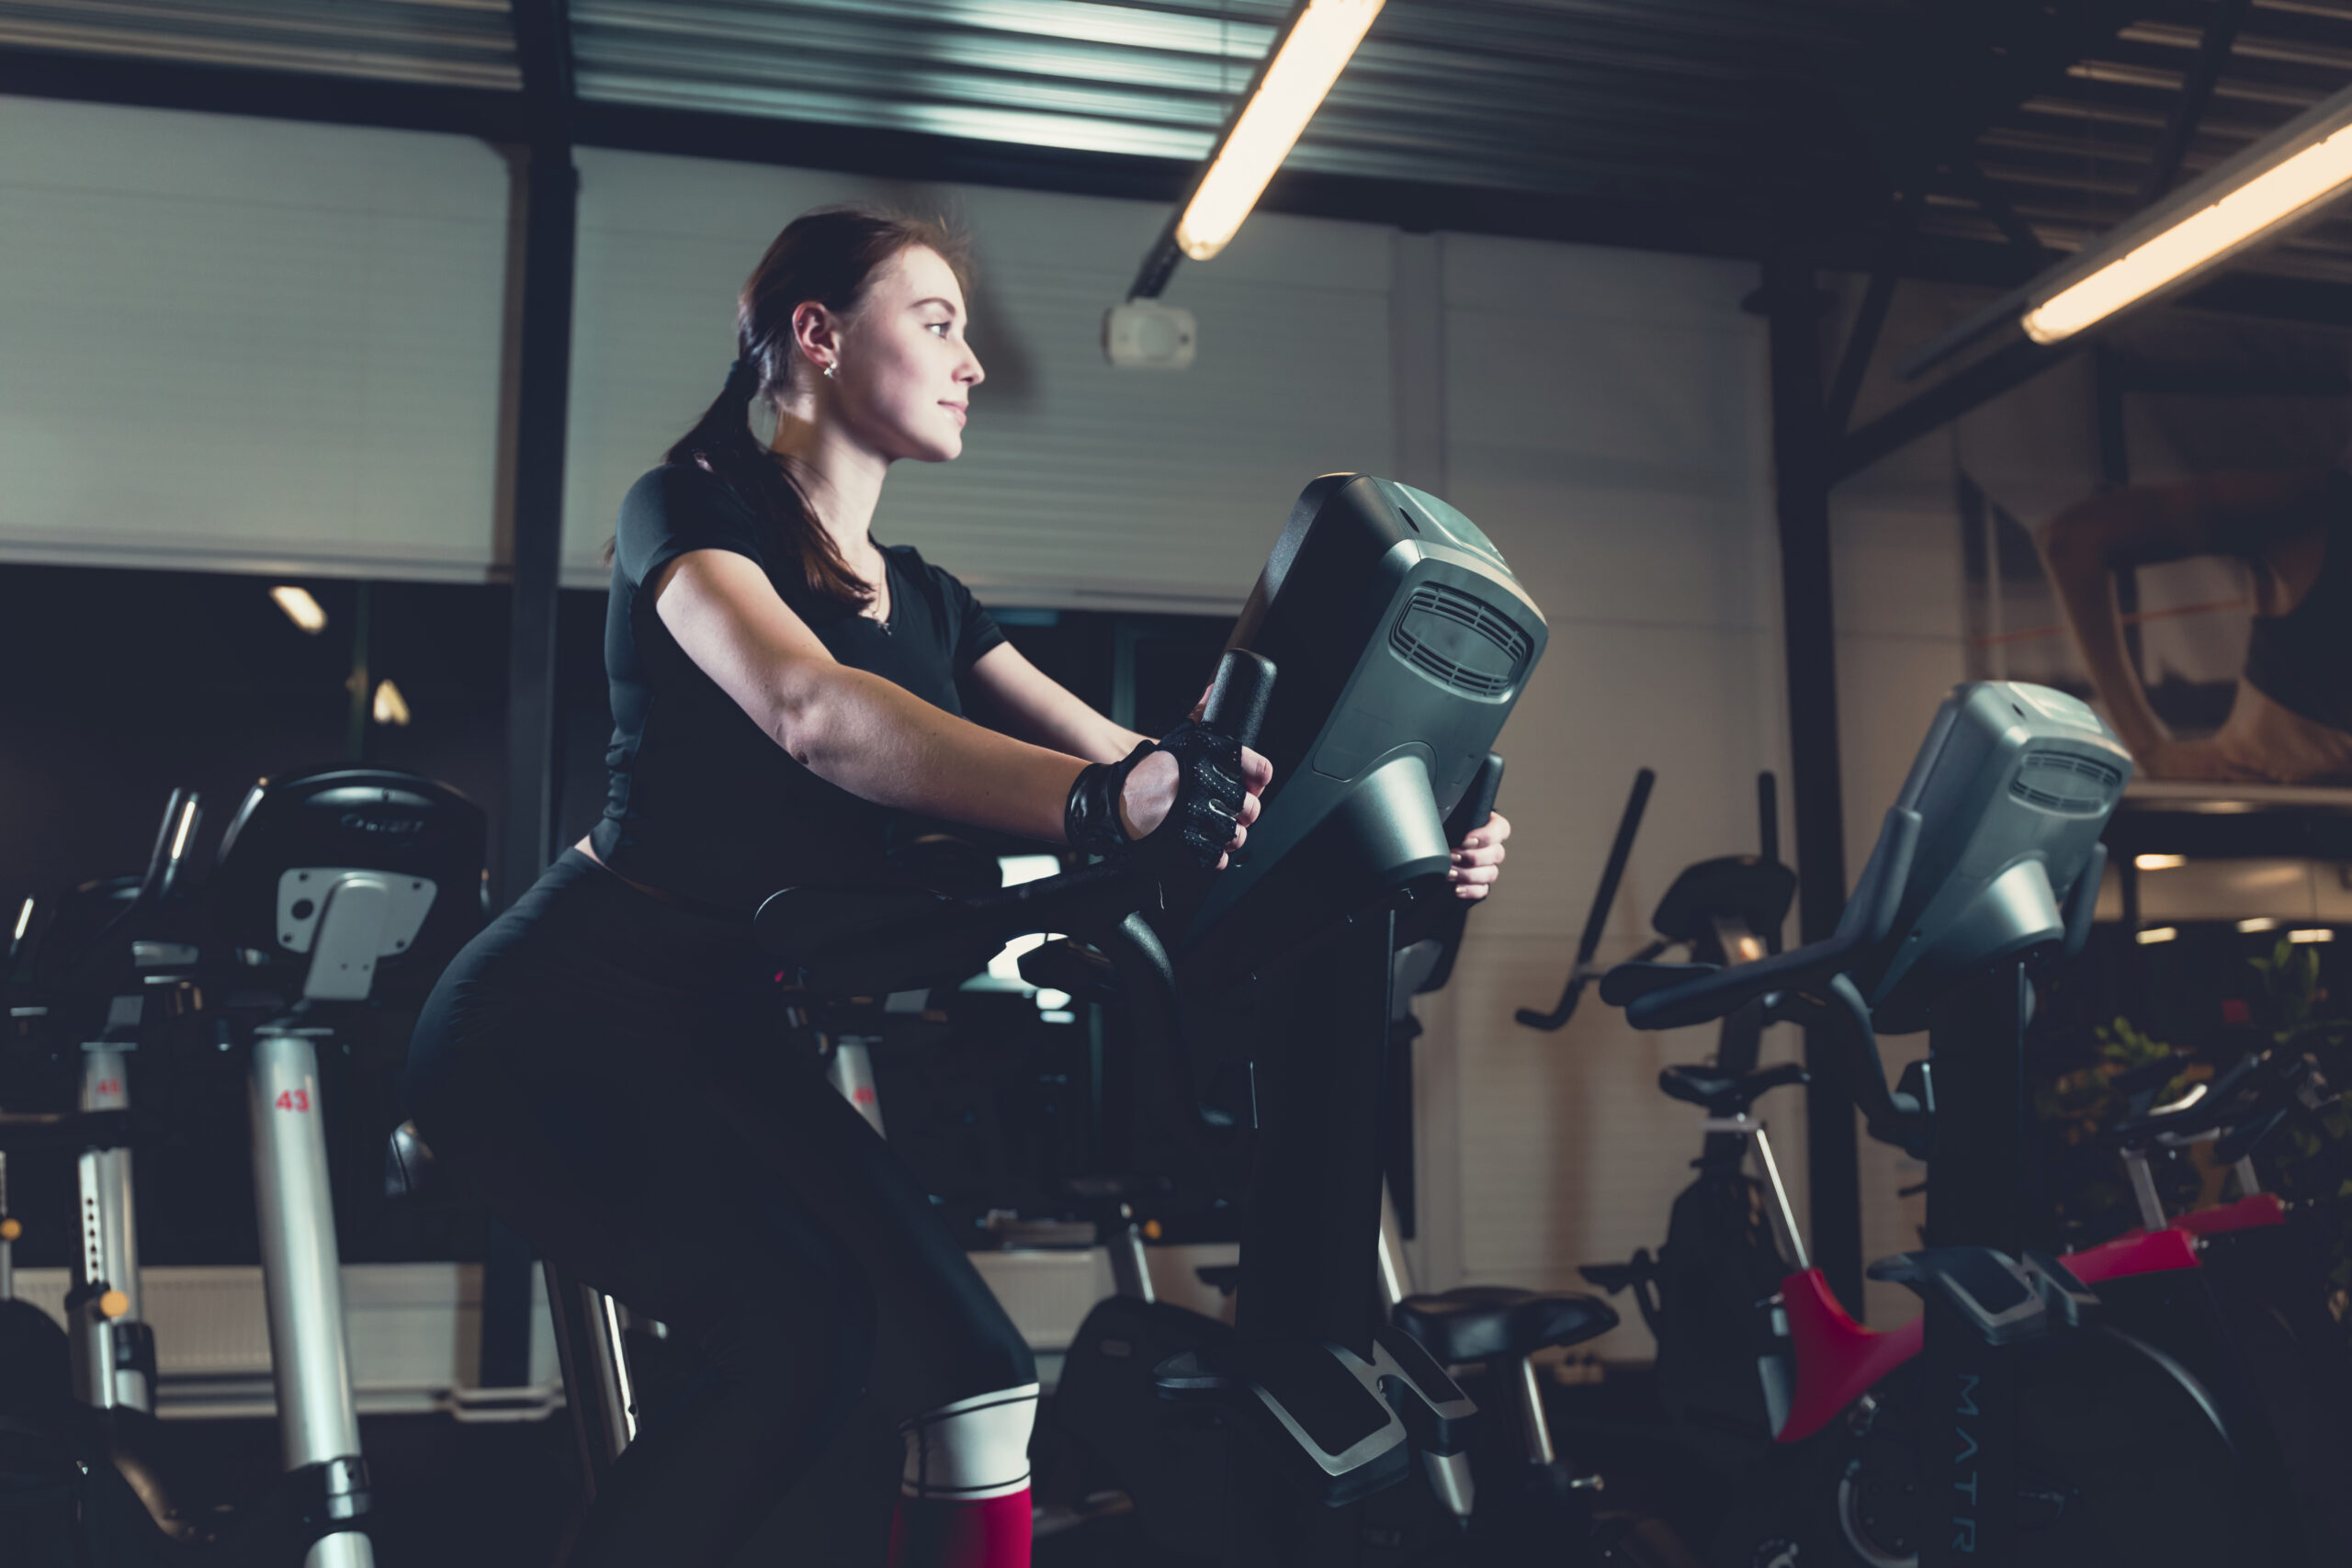 side-view-young-woman-riding-exercise-bike-gym